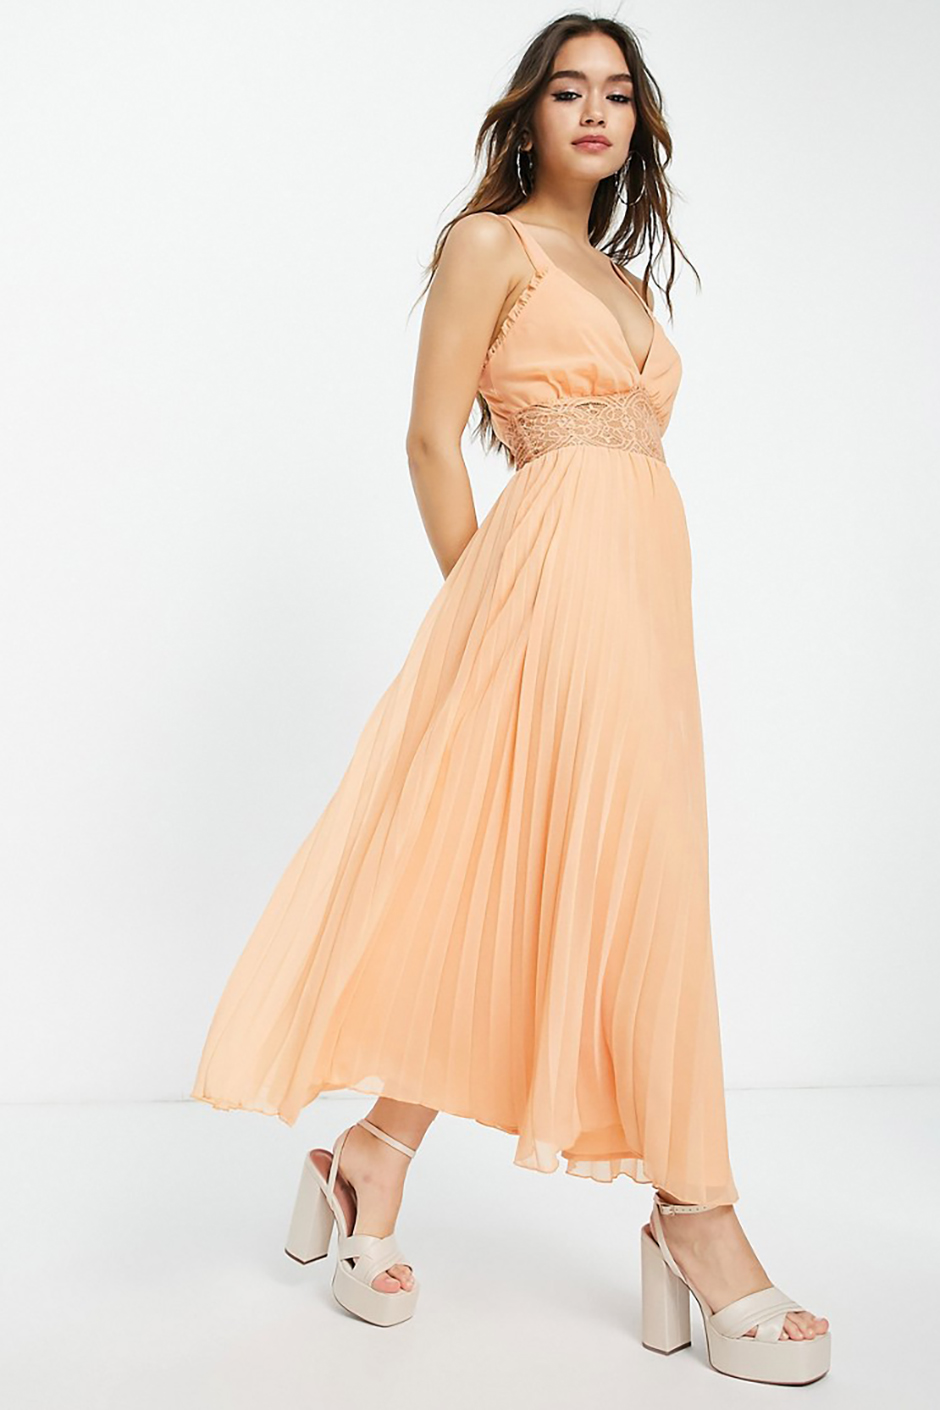 Peach bridesmaid dress from ASOS with lace insert and pleated skirt design 